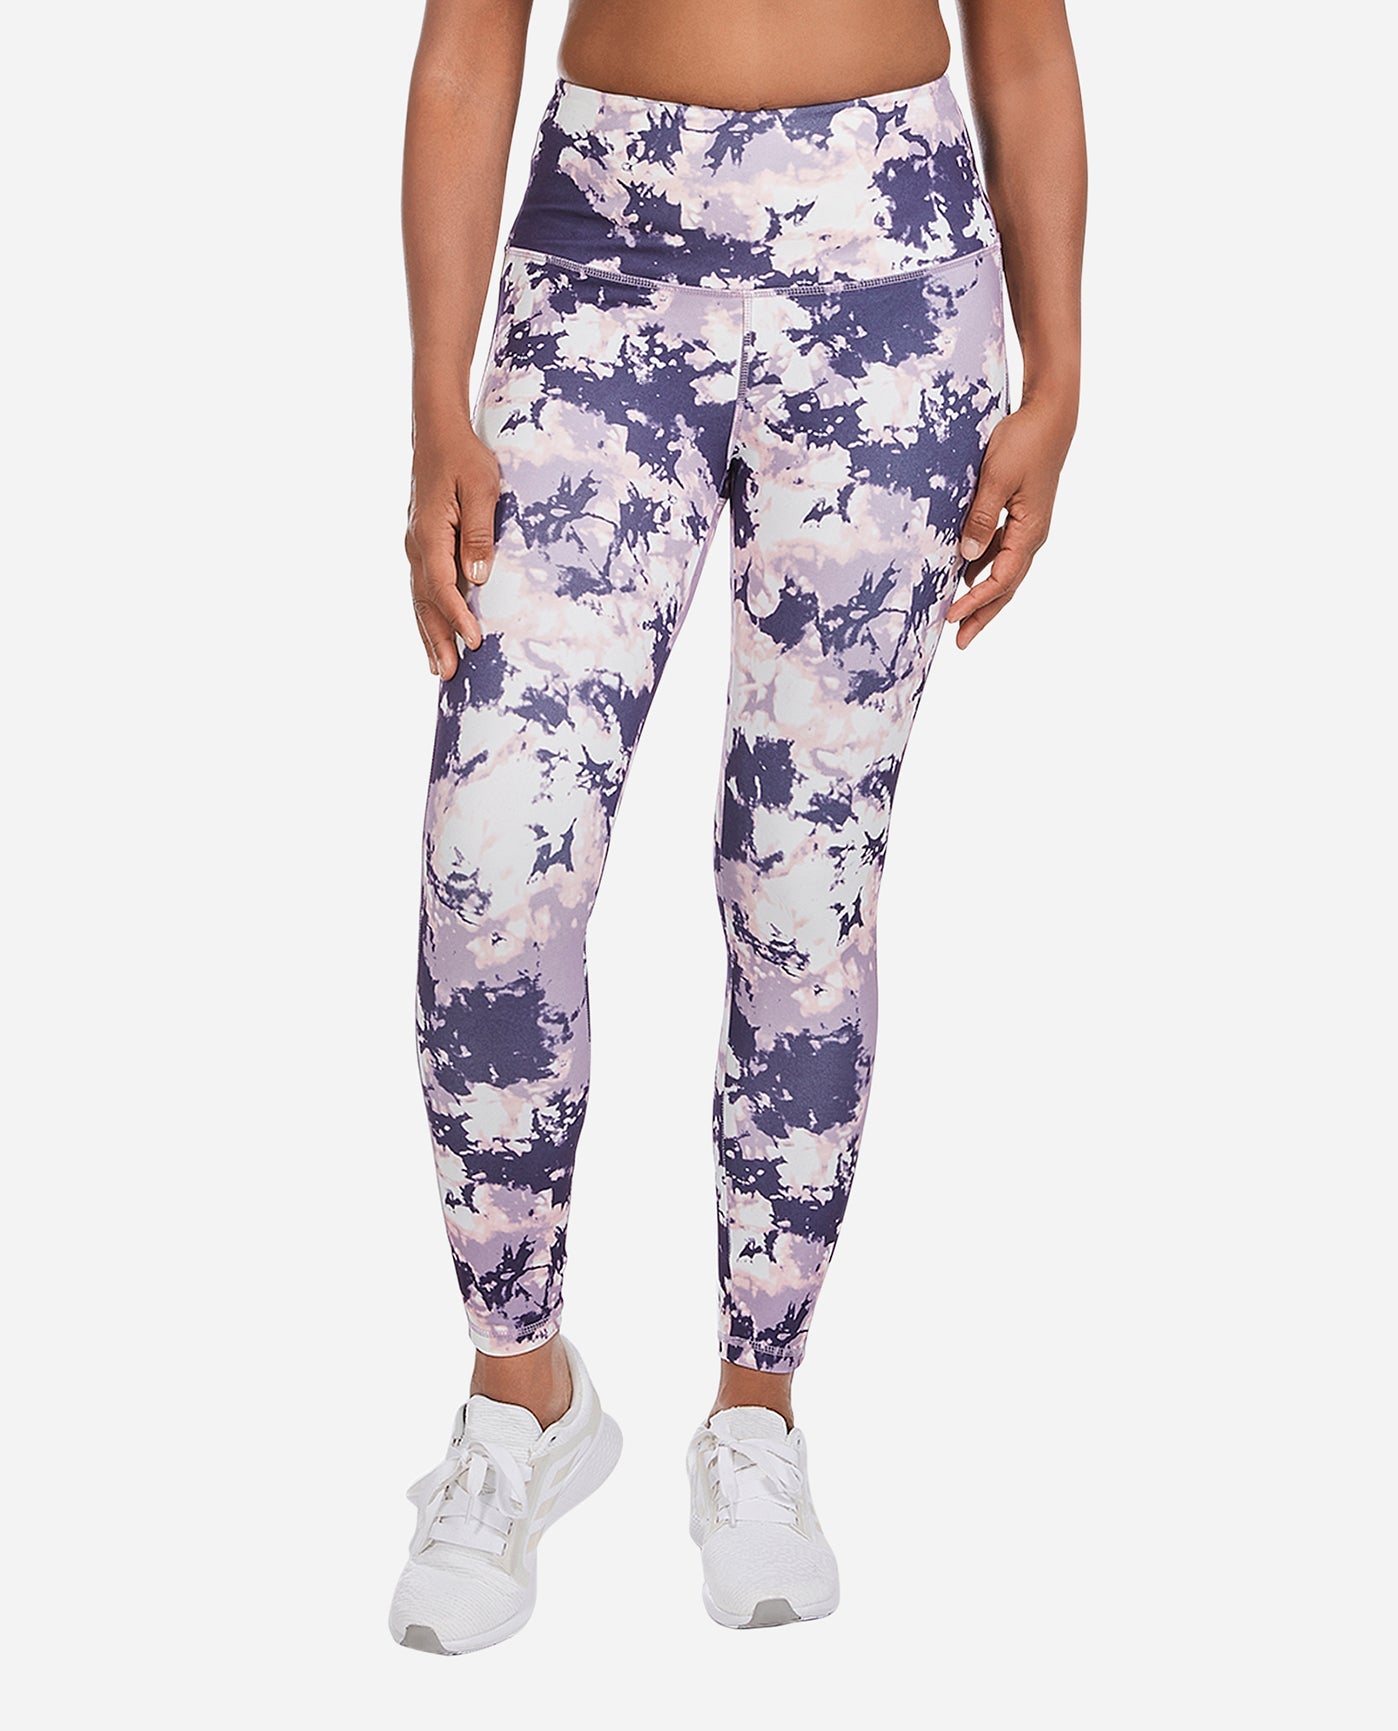 Danskin Ladies' Active Tight with Pockets (Marble Print, Large) 